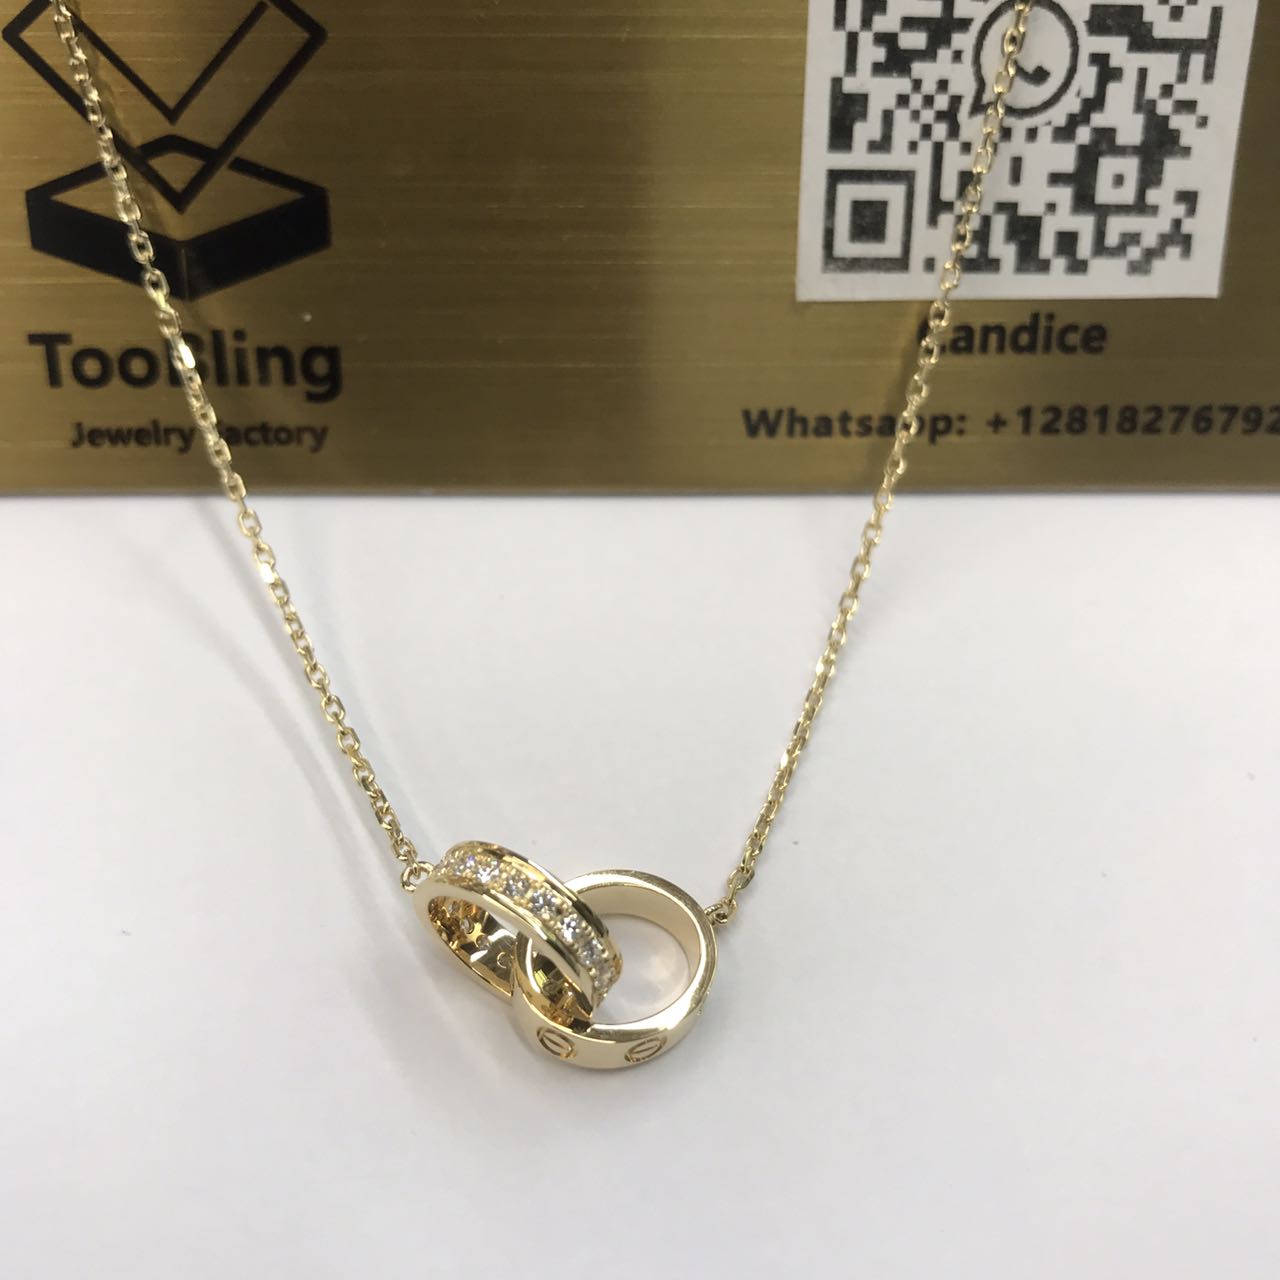 Replica Cartier Love Necklace Diamonds 18K Yellow Gold Double Rings